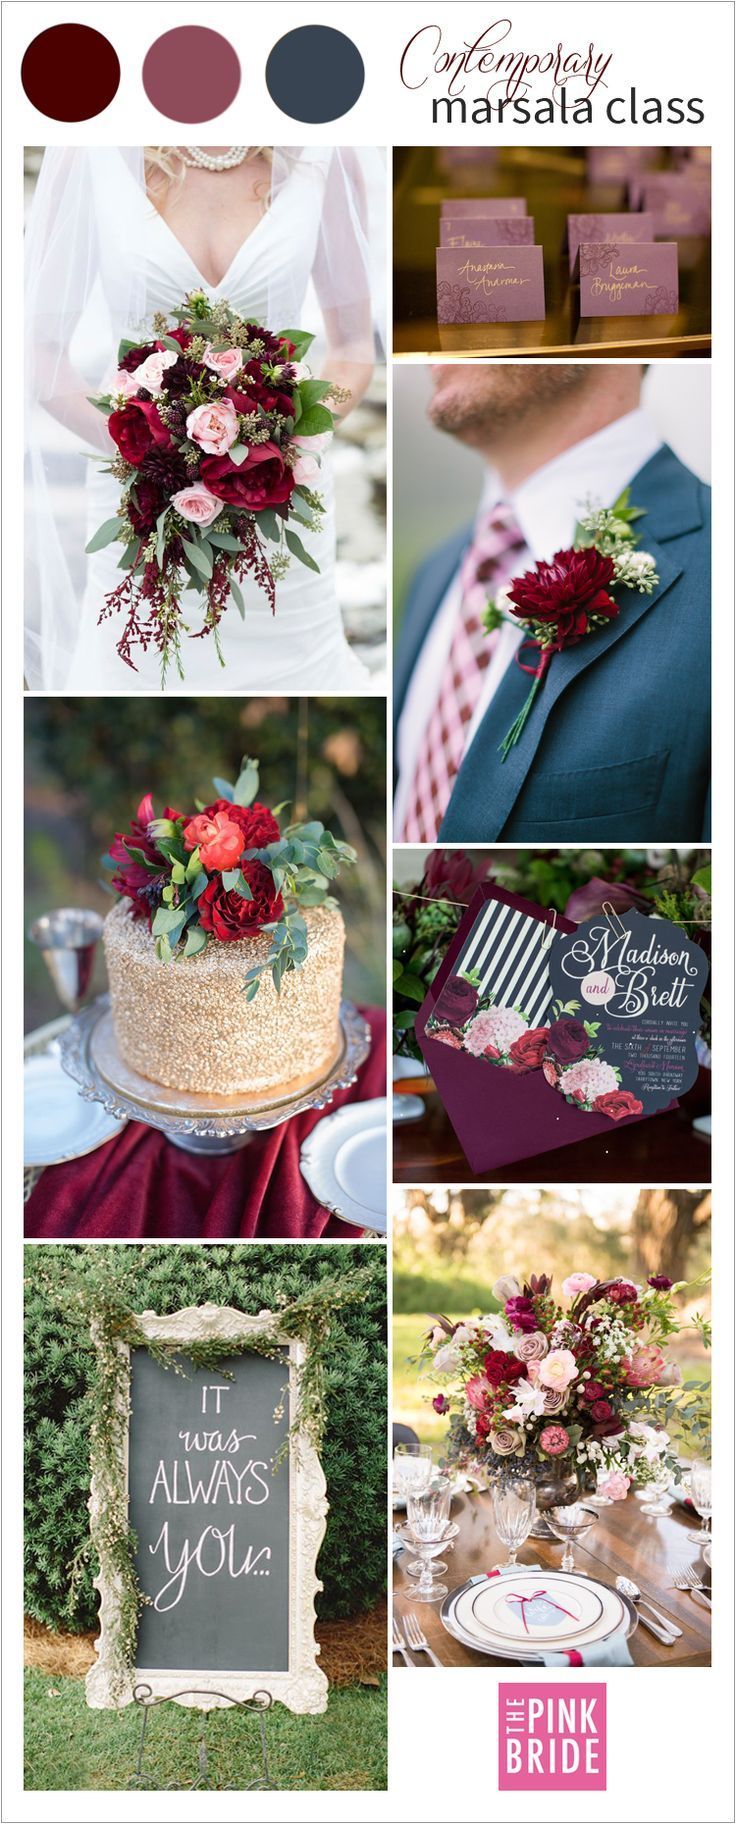 Marsala wedding color palette inspiration board with contemporary details | The Pink Bride www.thepinkbride.com